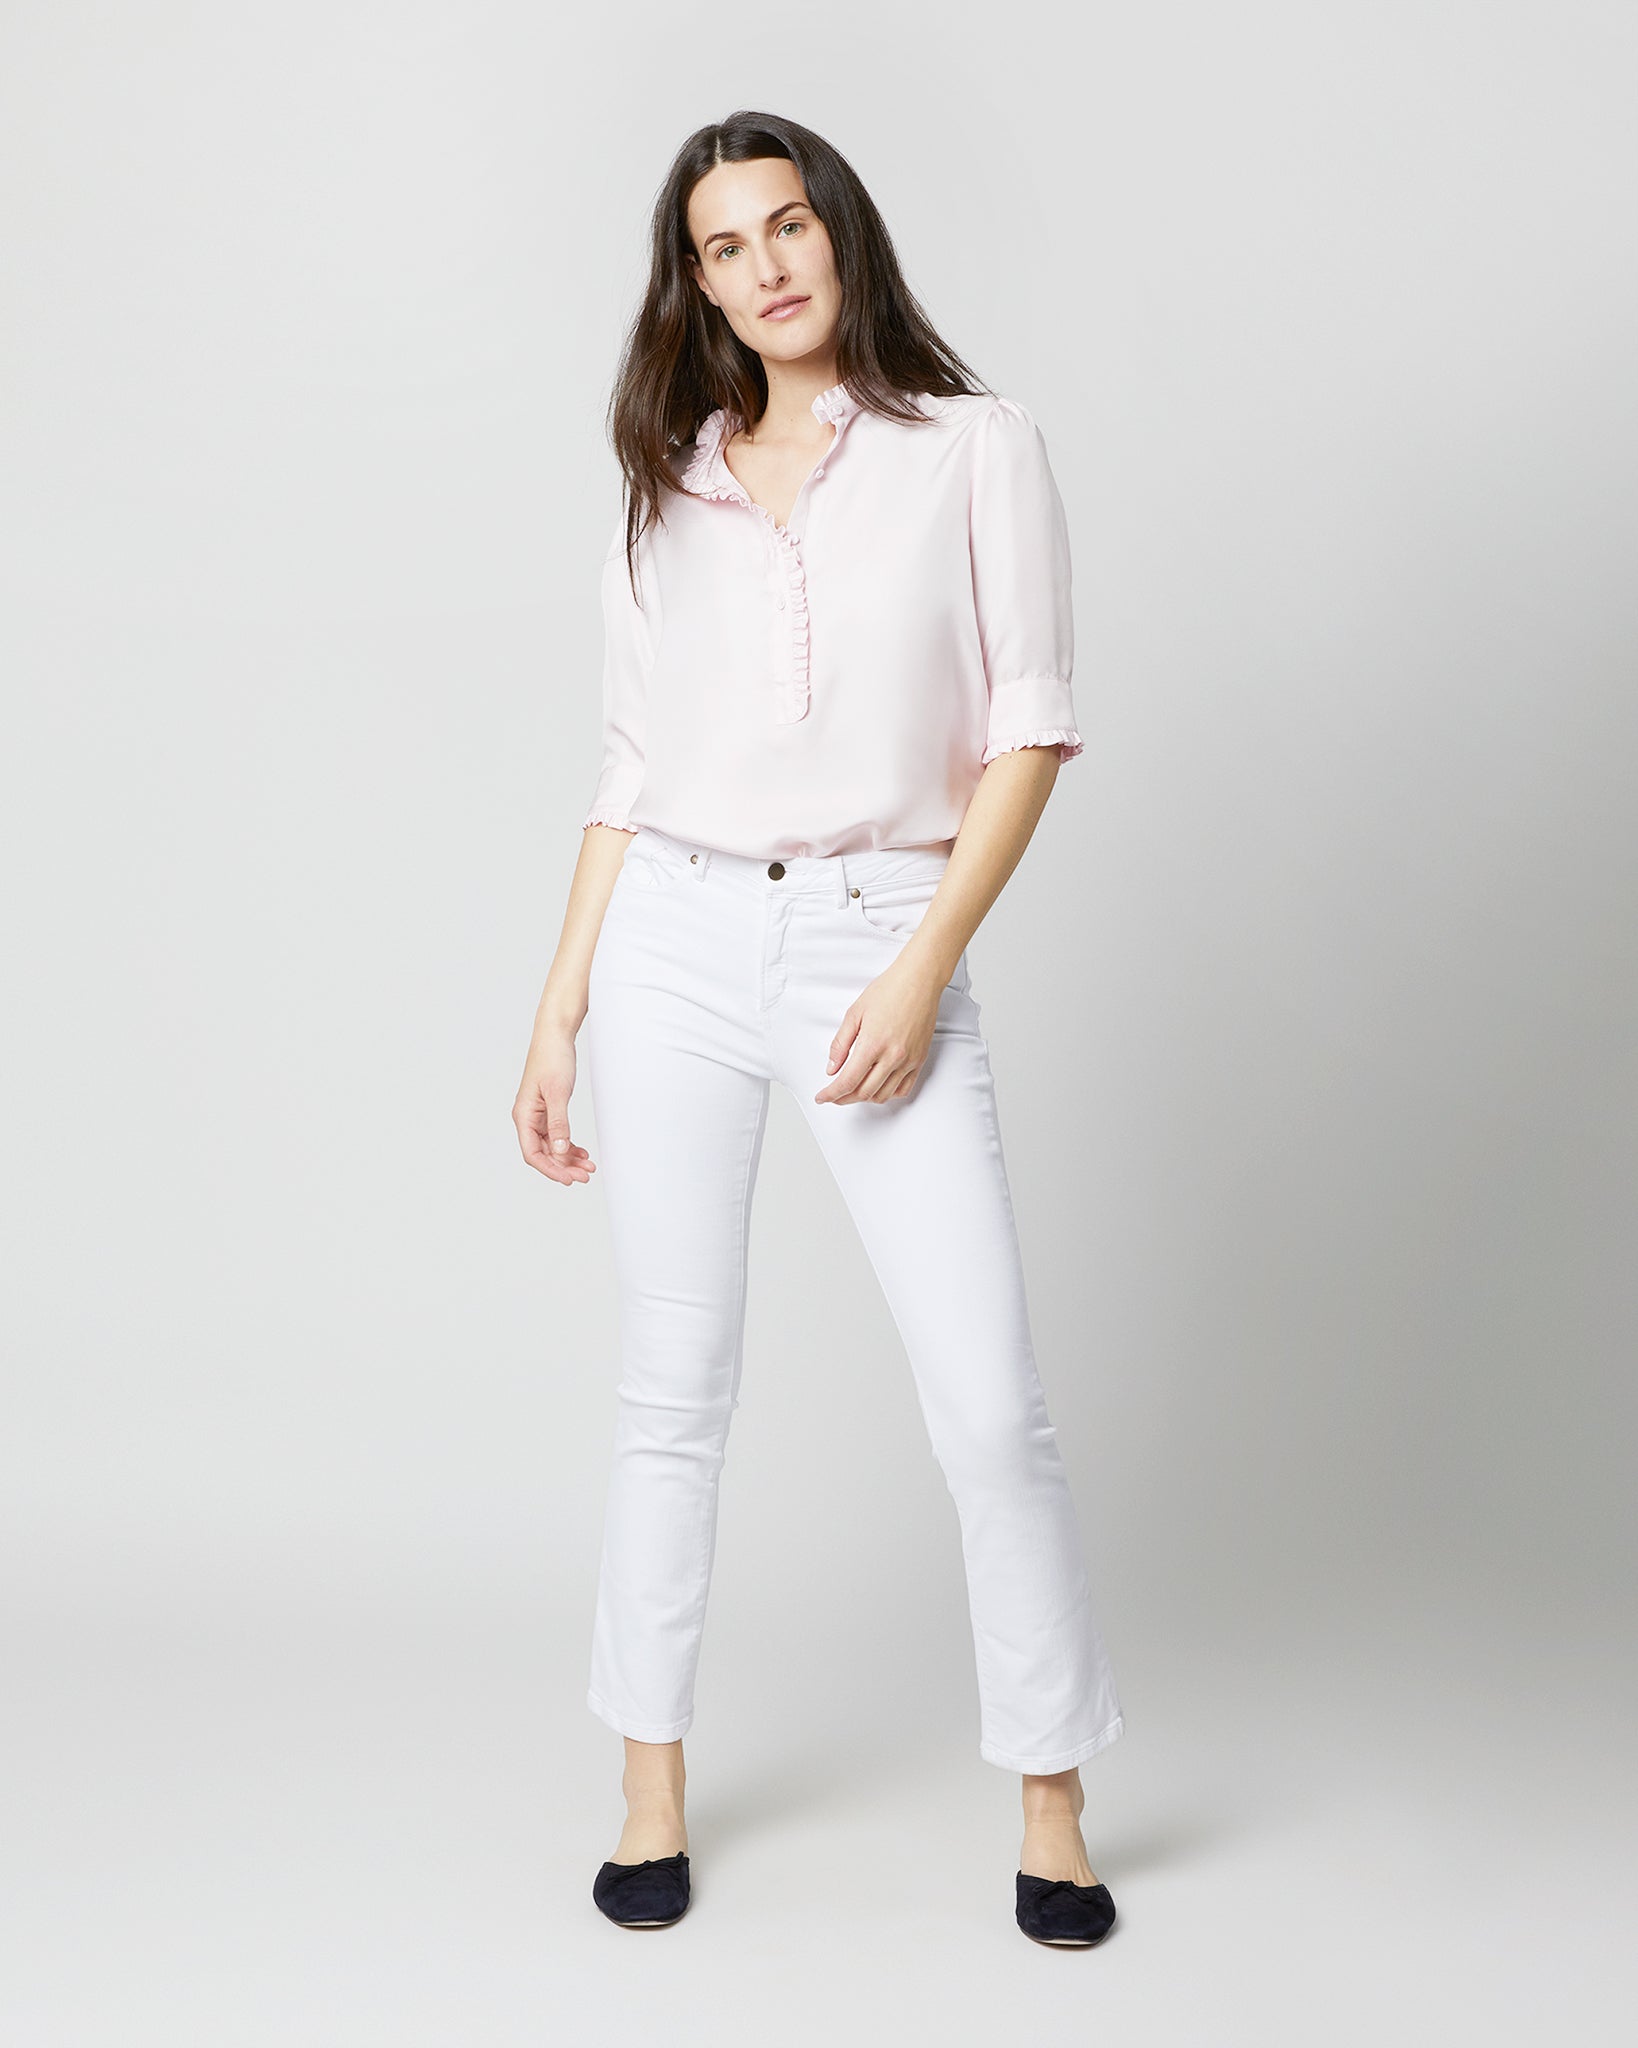 Elbow-Sleeve Frill Blouse in Pale Pink Silk Twill